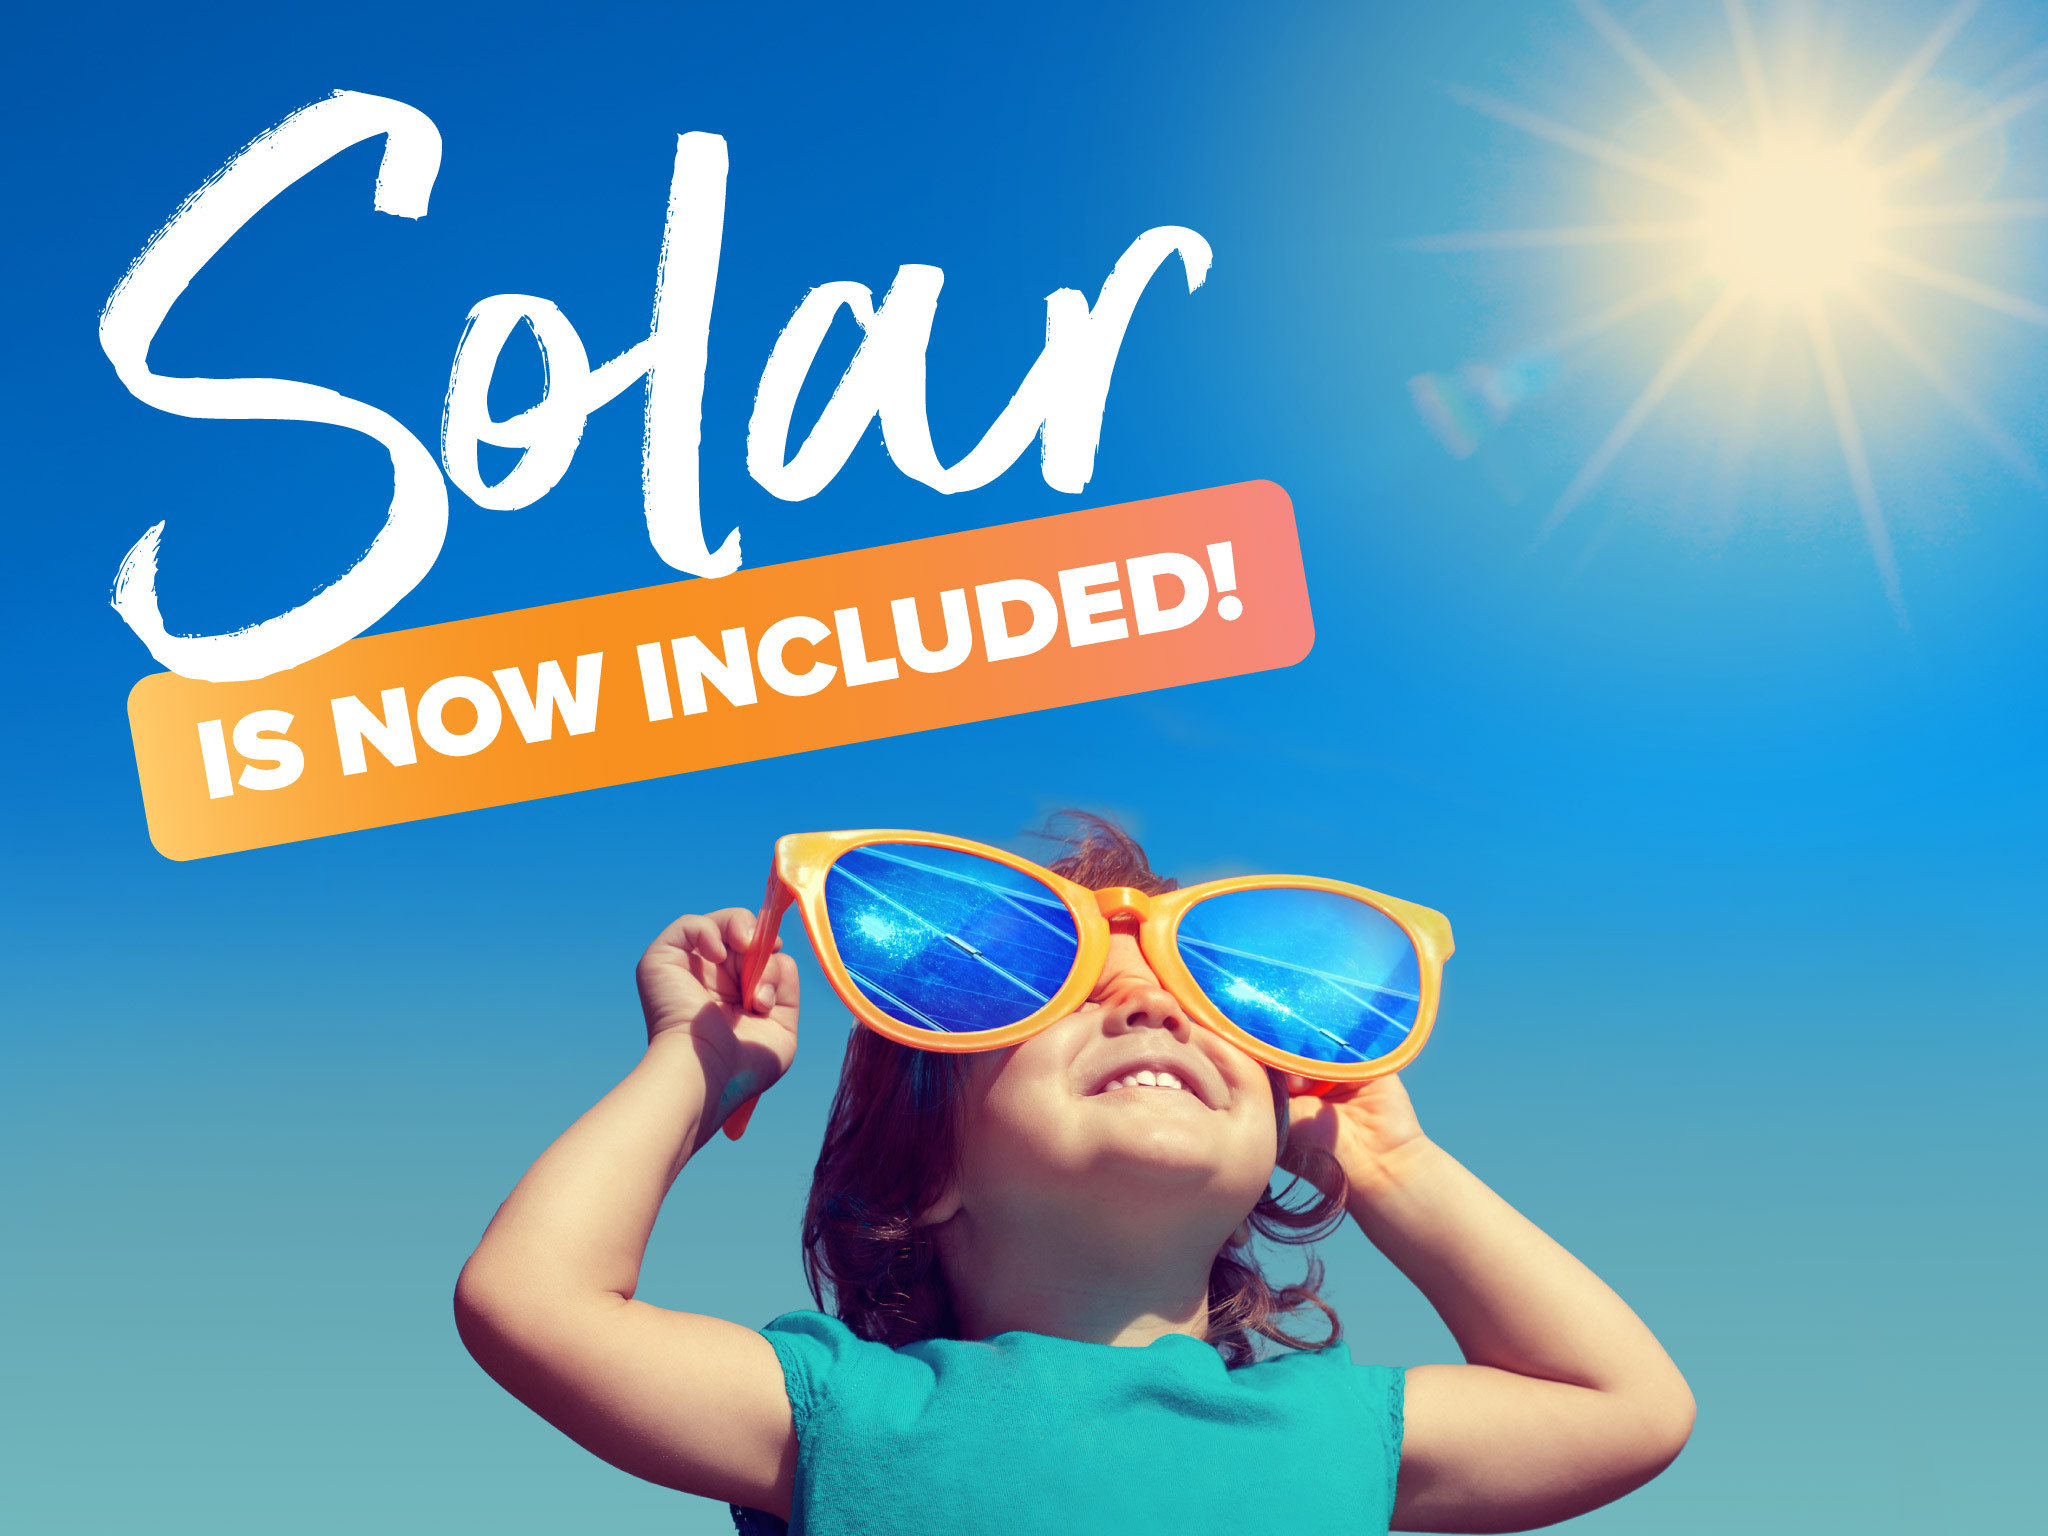 Solar is now included!